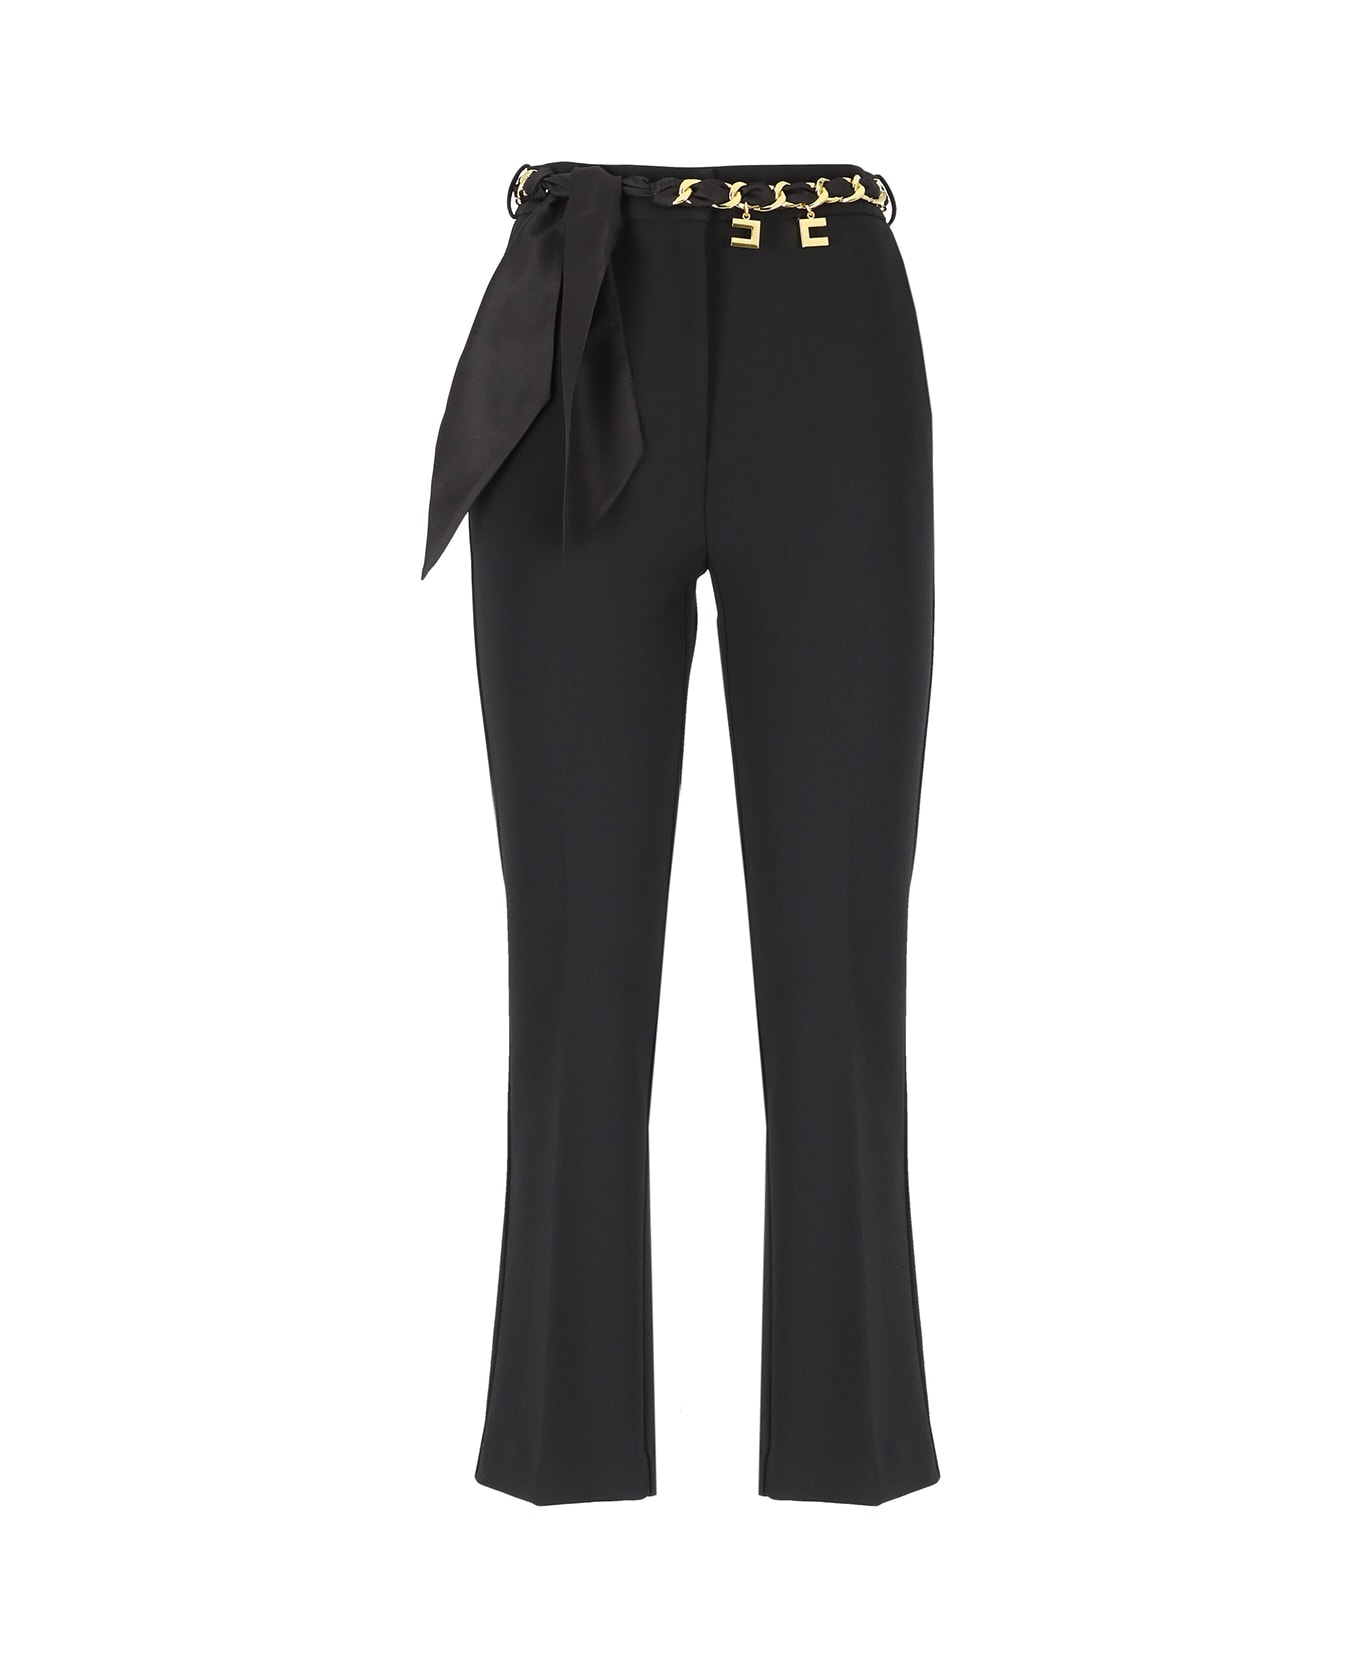 Elisabetta Franchi Black Trousers With Bow - Black ボトムス